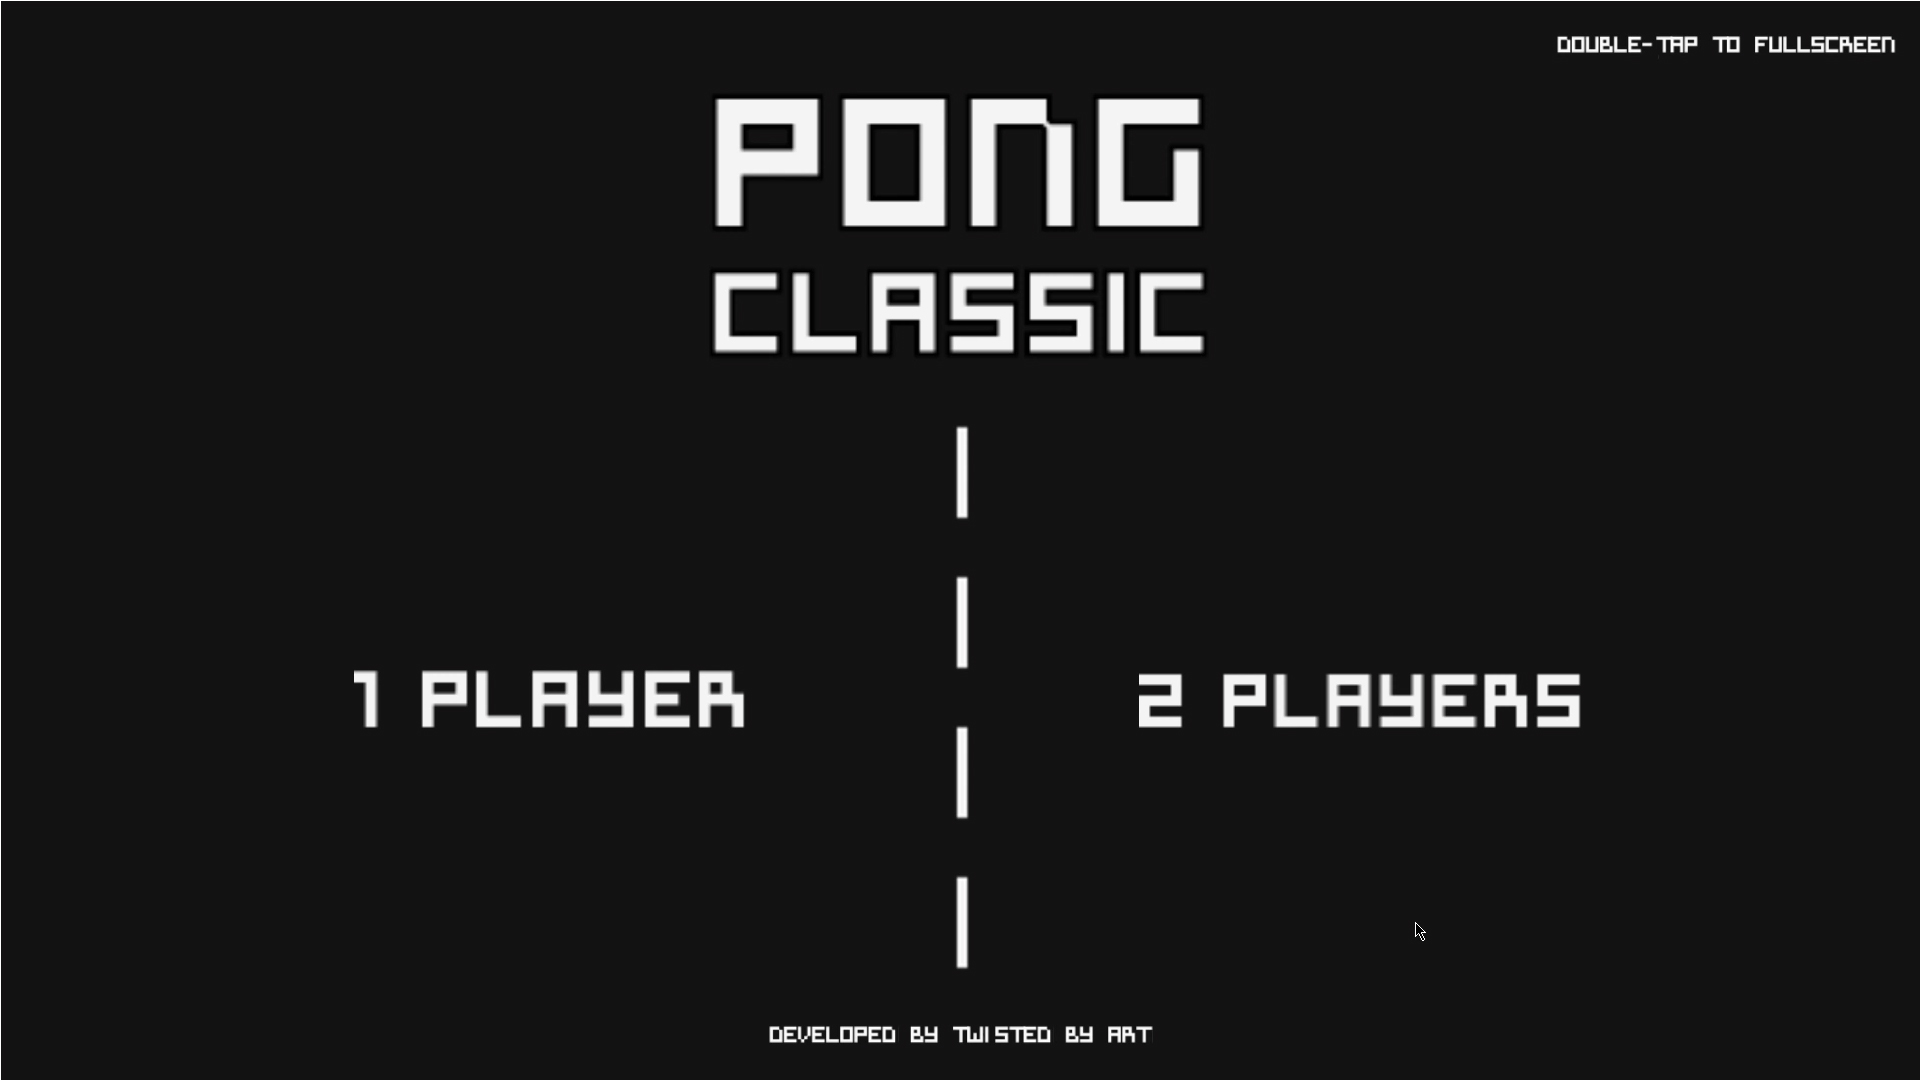 Classic Pong Game (2 Players)